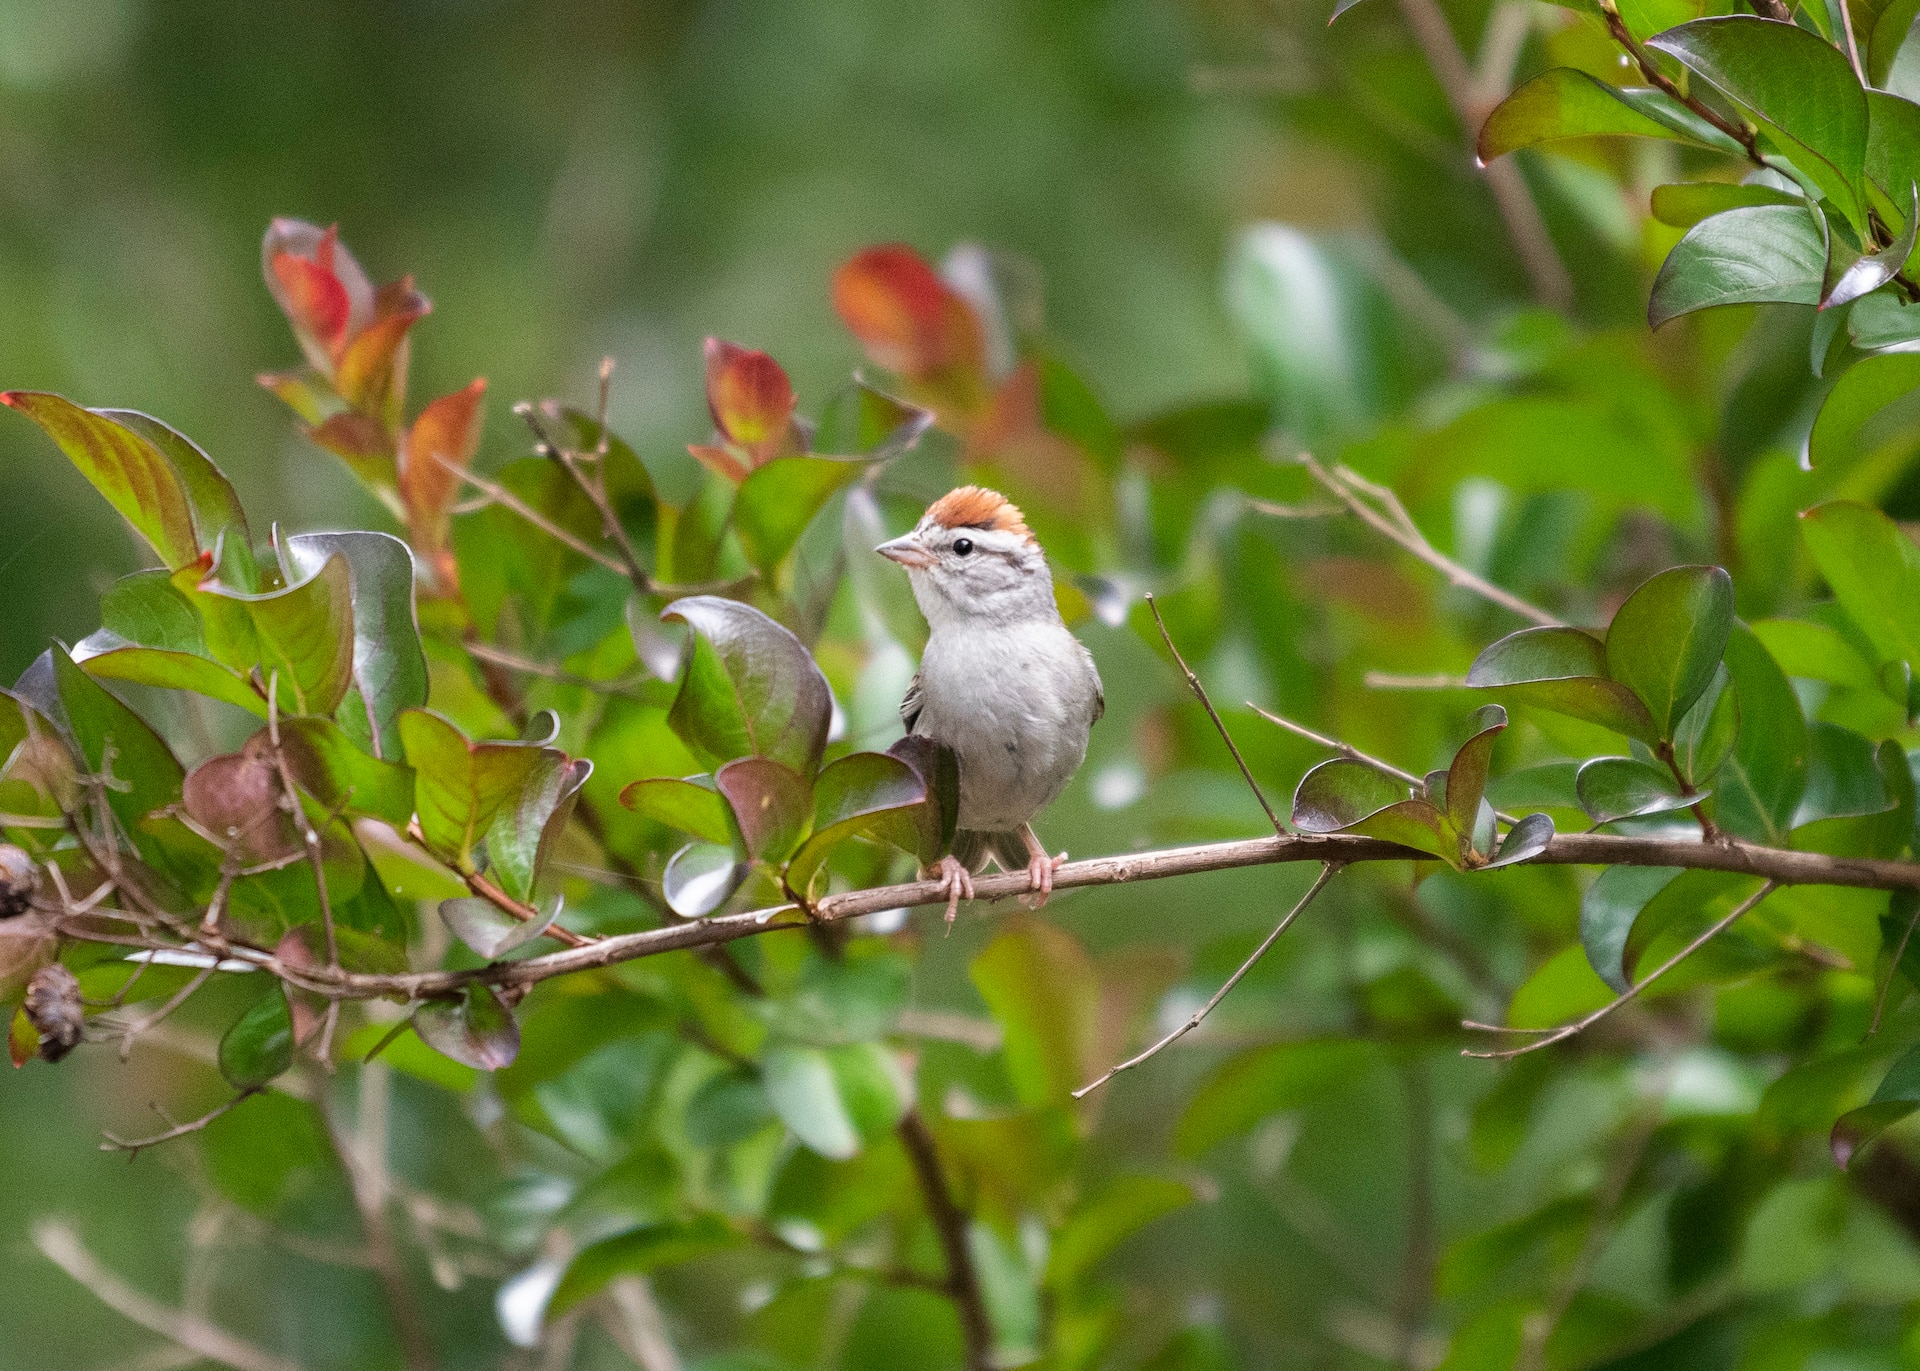 Photograph of a bird perched on a tree branch taken using a f / 2.8 aperture.